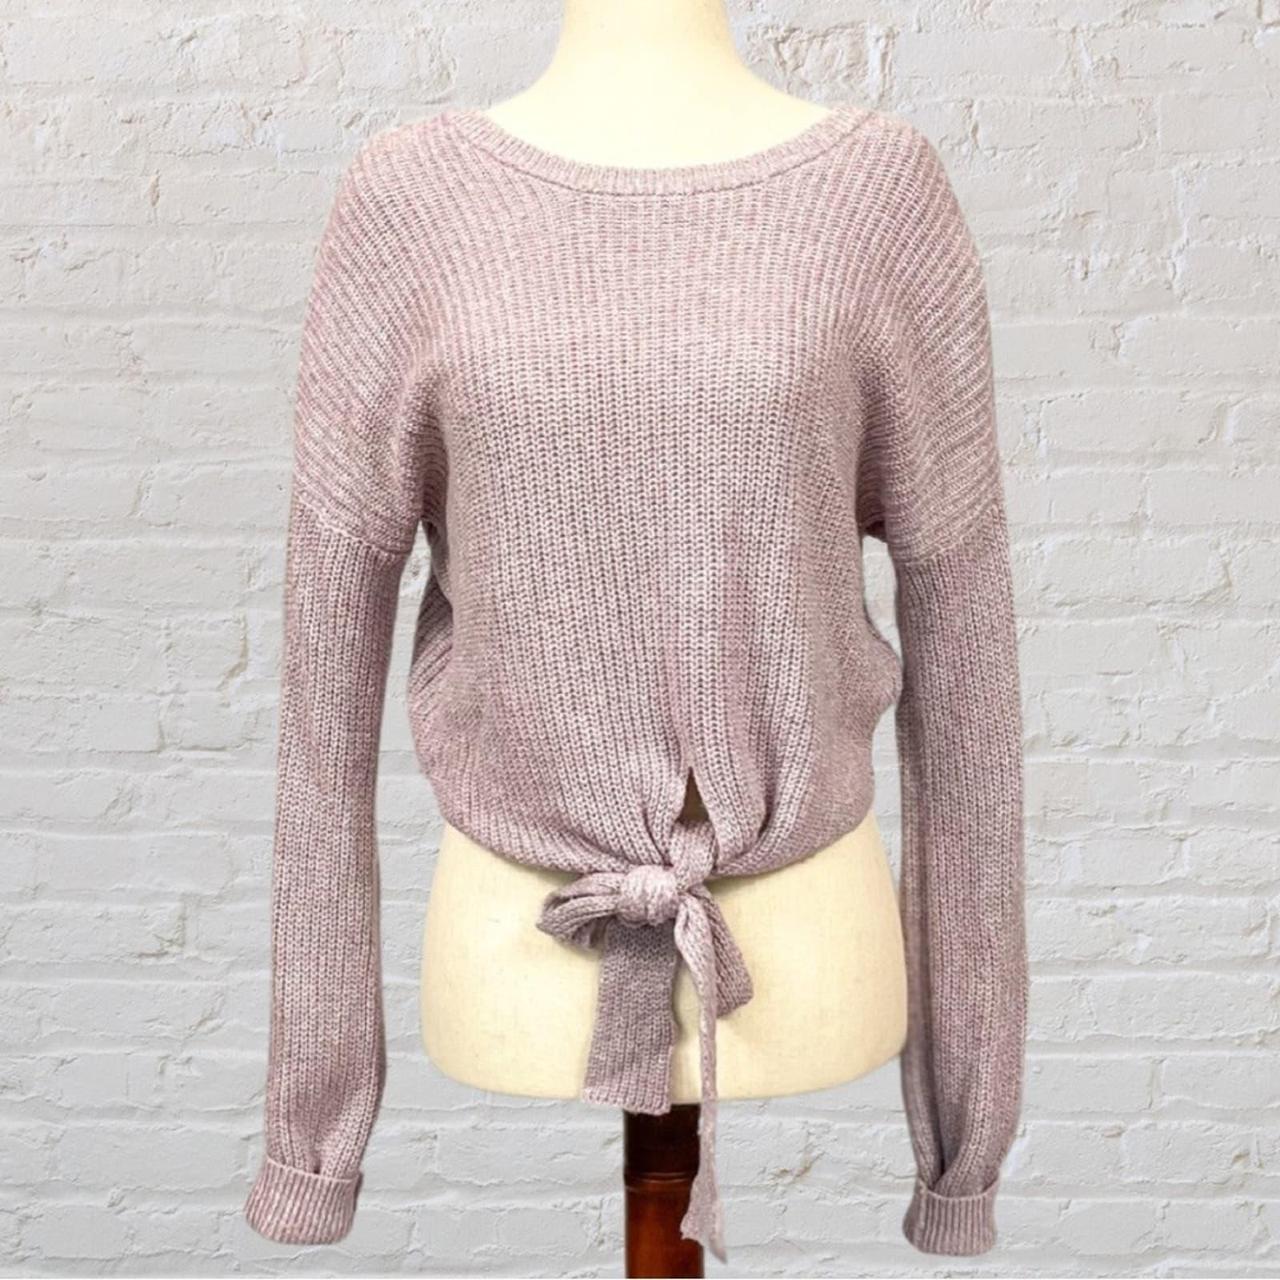 Hollister knitted knot front top in pink